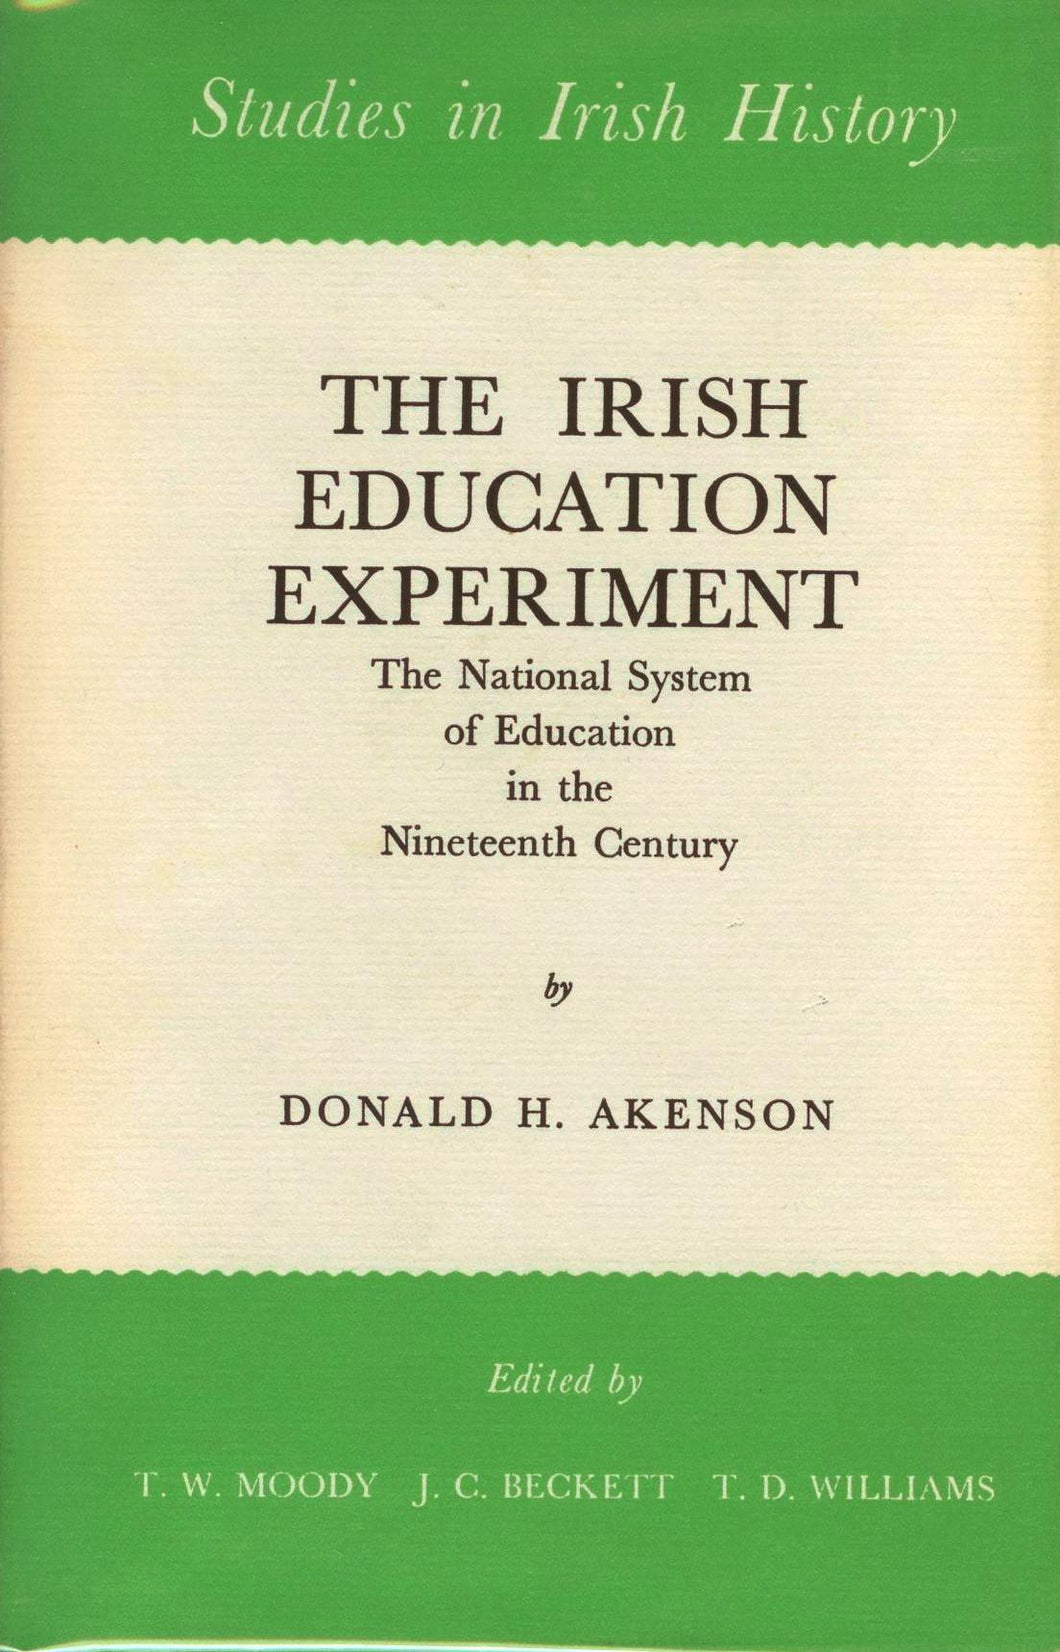 The Irish Education Experiment: The National System of Education in the Nineteenth Century